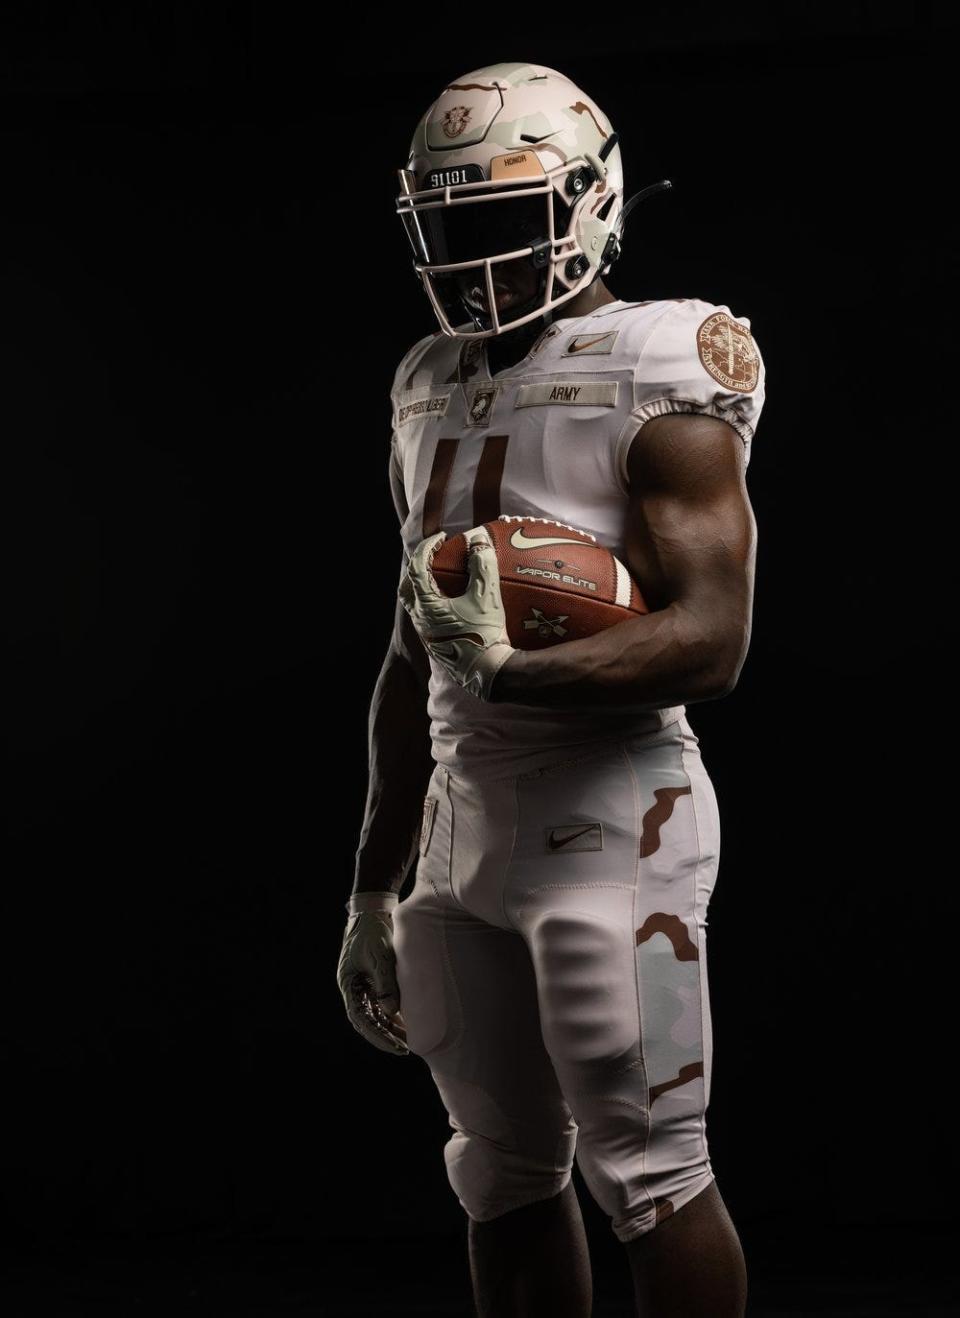 Army will wear this specialized uniform for the Dec. 11 Navy game. PHOTO PROVIDED BY NIKE